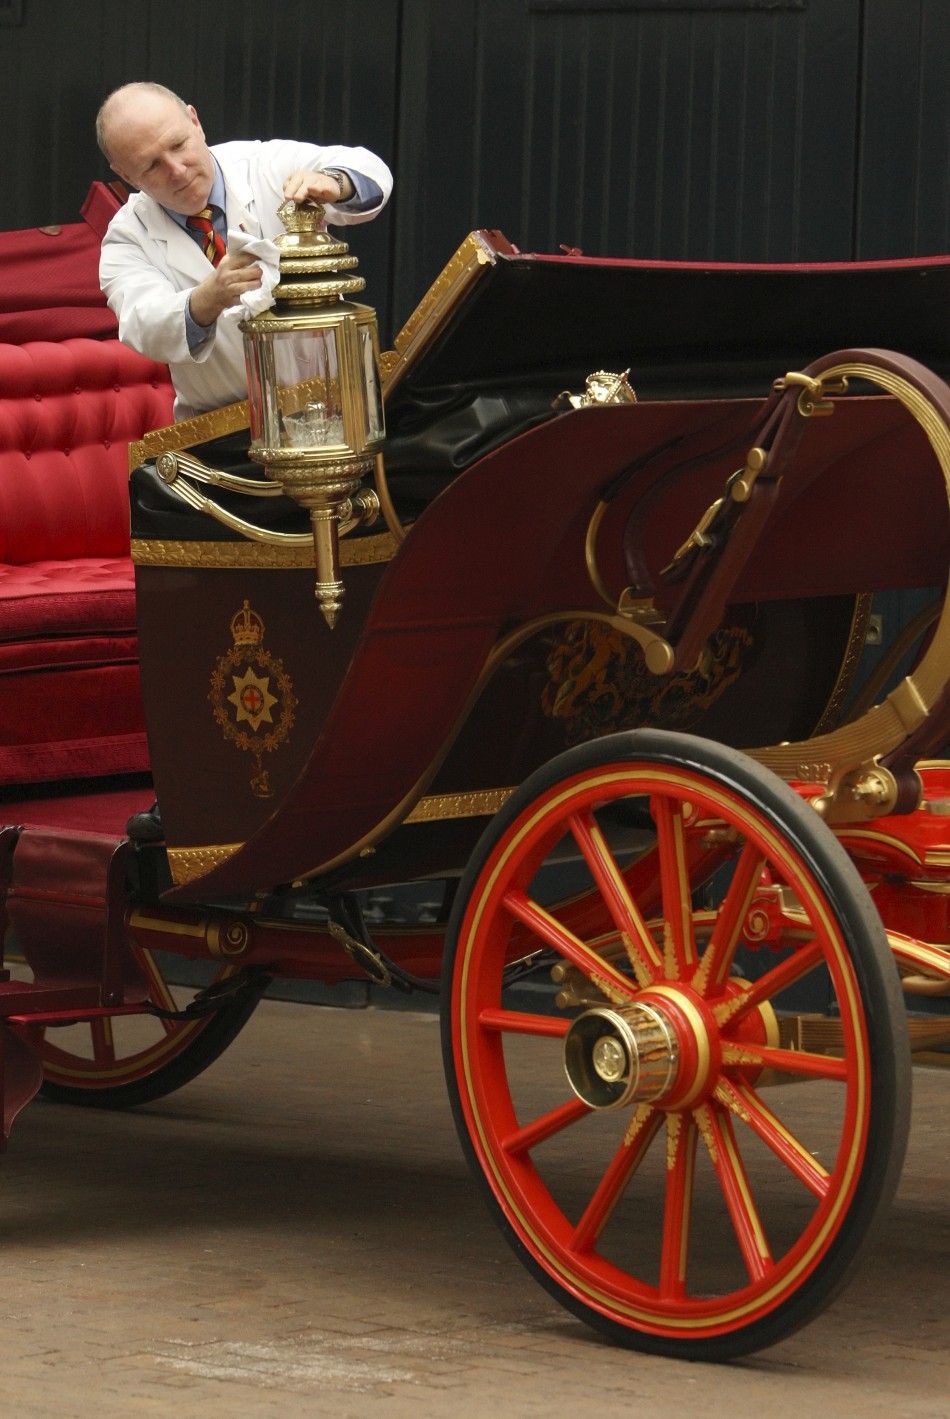 The Royal Couples Carriage